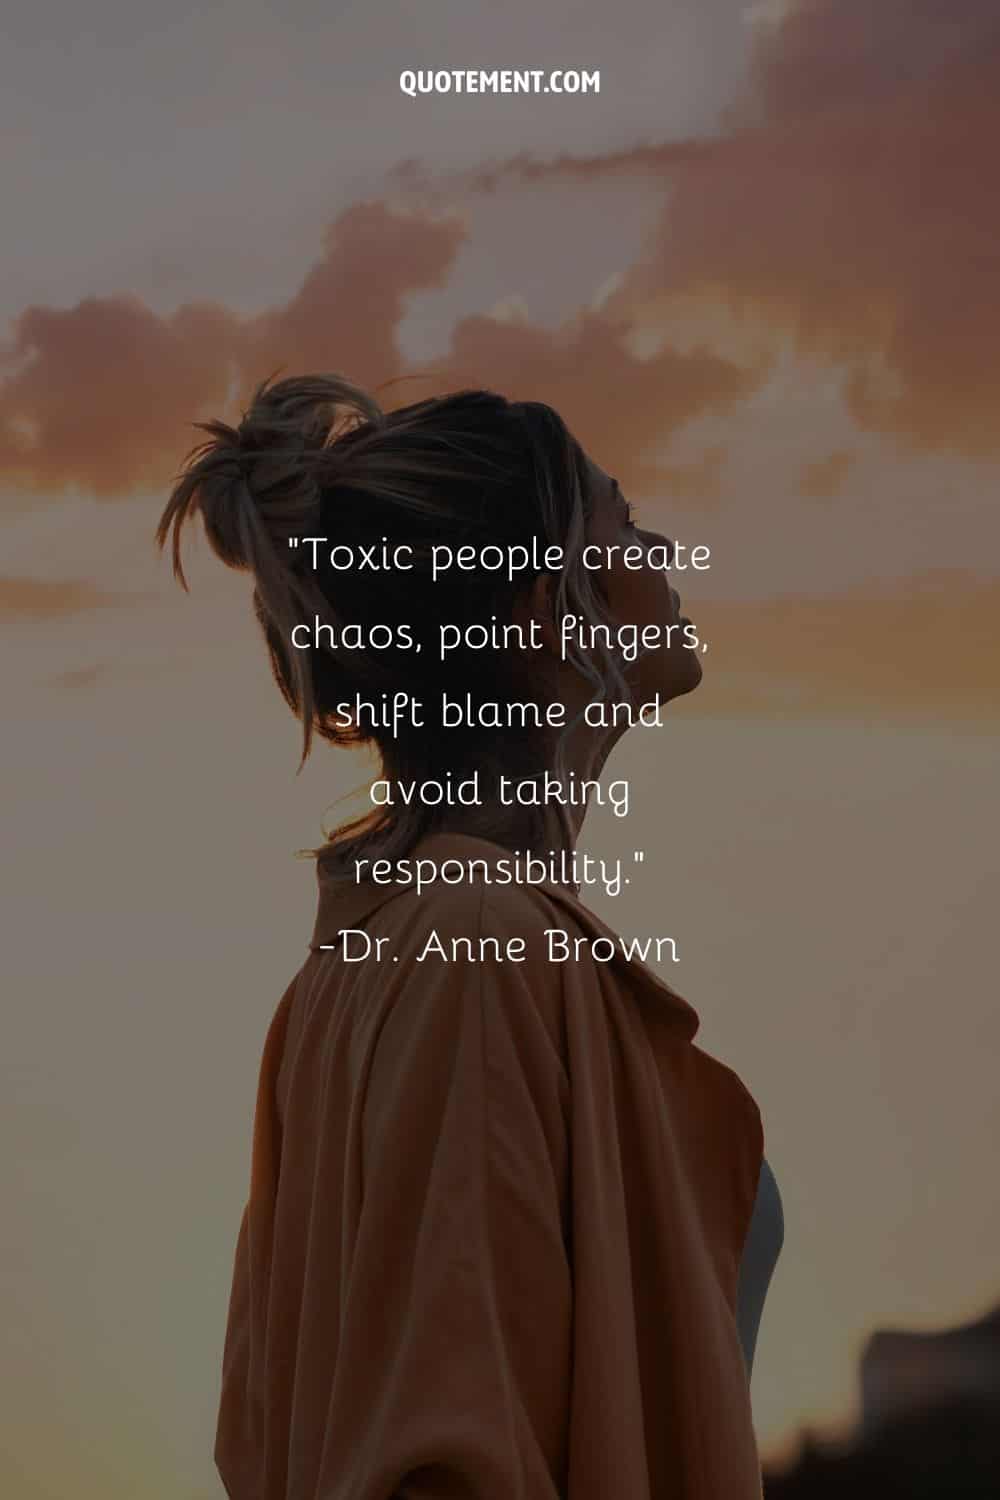 Toxic people create chaos, point fingers, shift blame and avoid taking responsibility